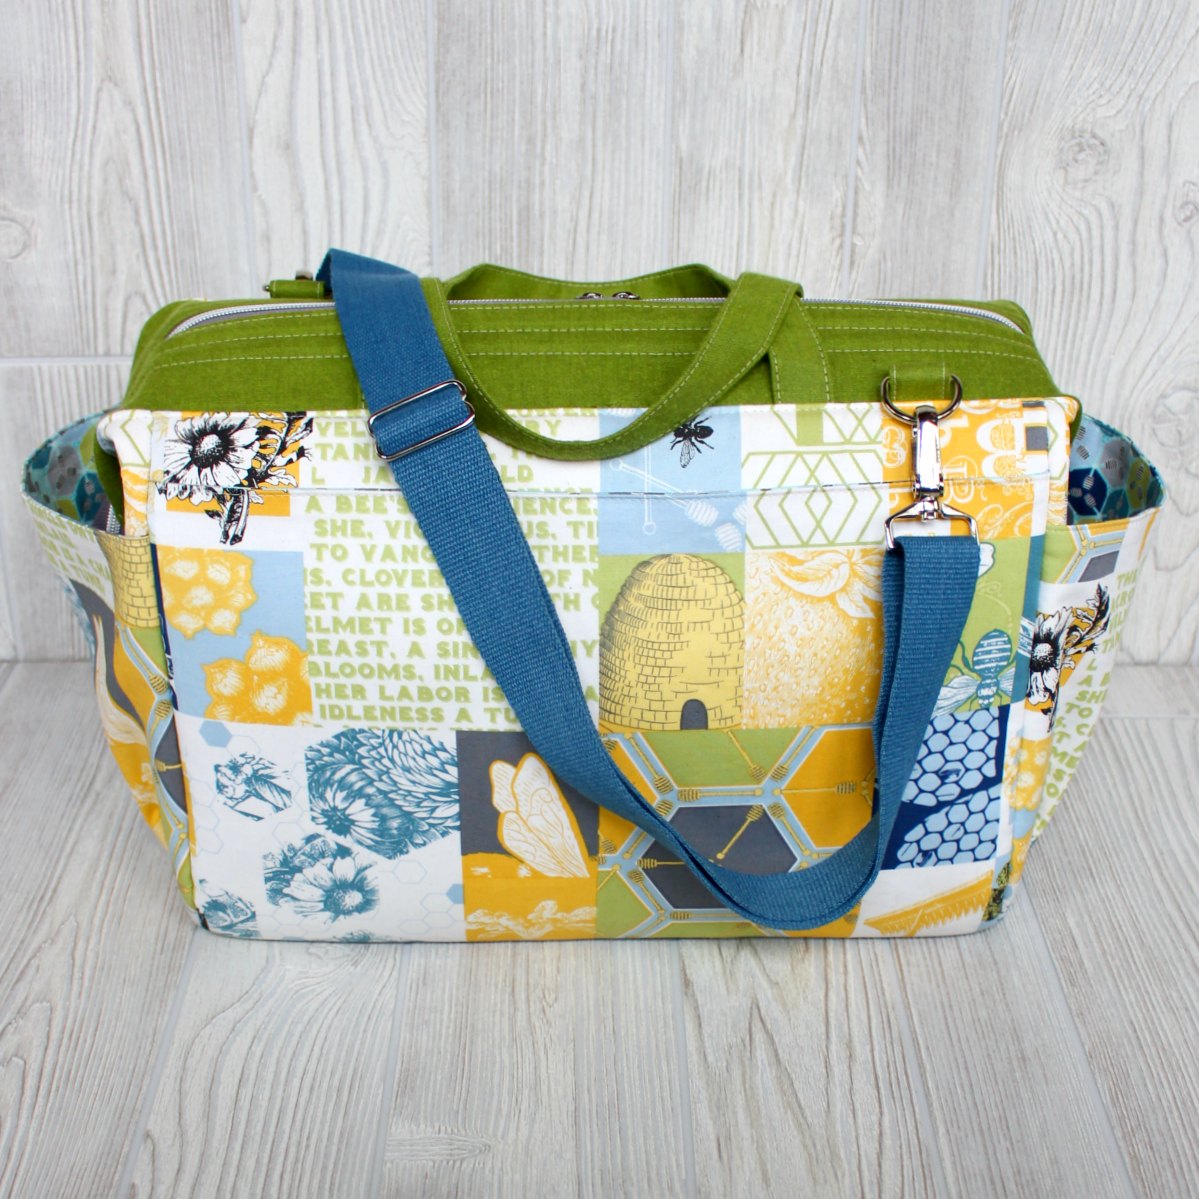 The Clover Convertible Bag - PDF Sewing Pattern